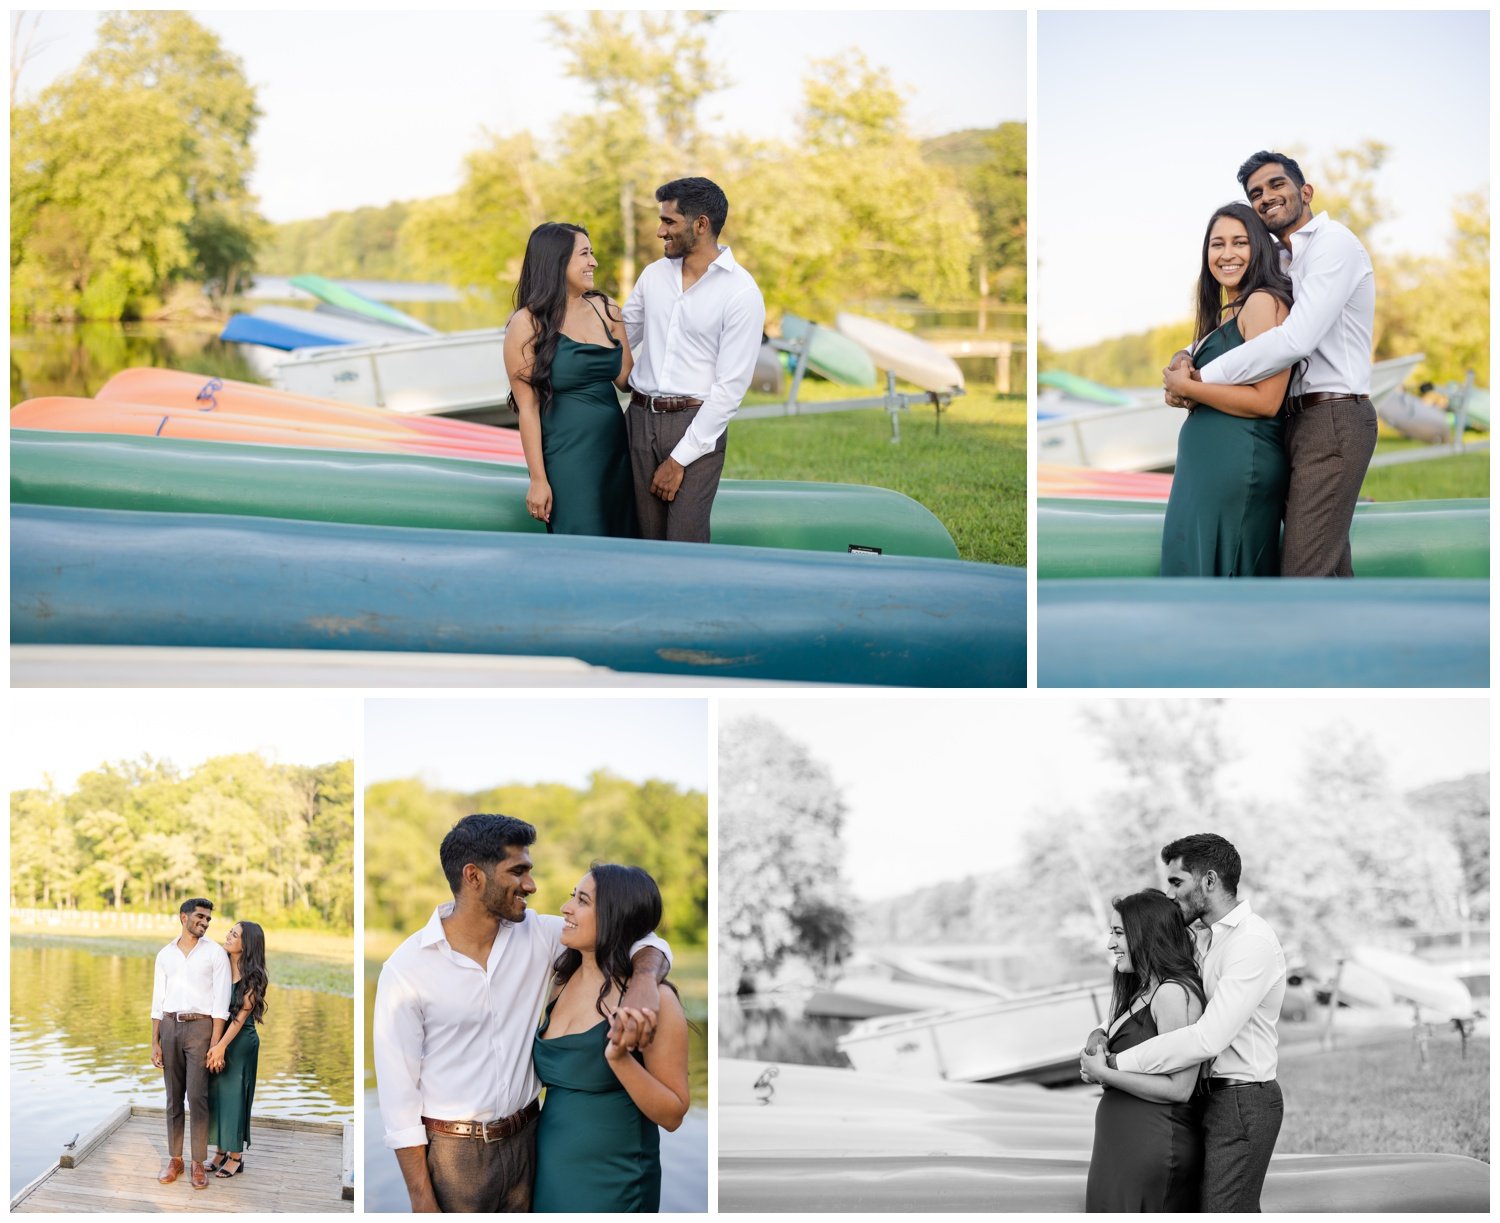 French-Creek-Park-PA-Summer-Lakeside-Engagement-Session-2.jpg